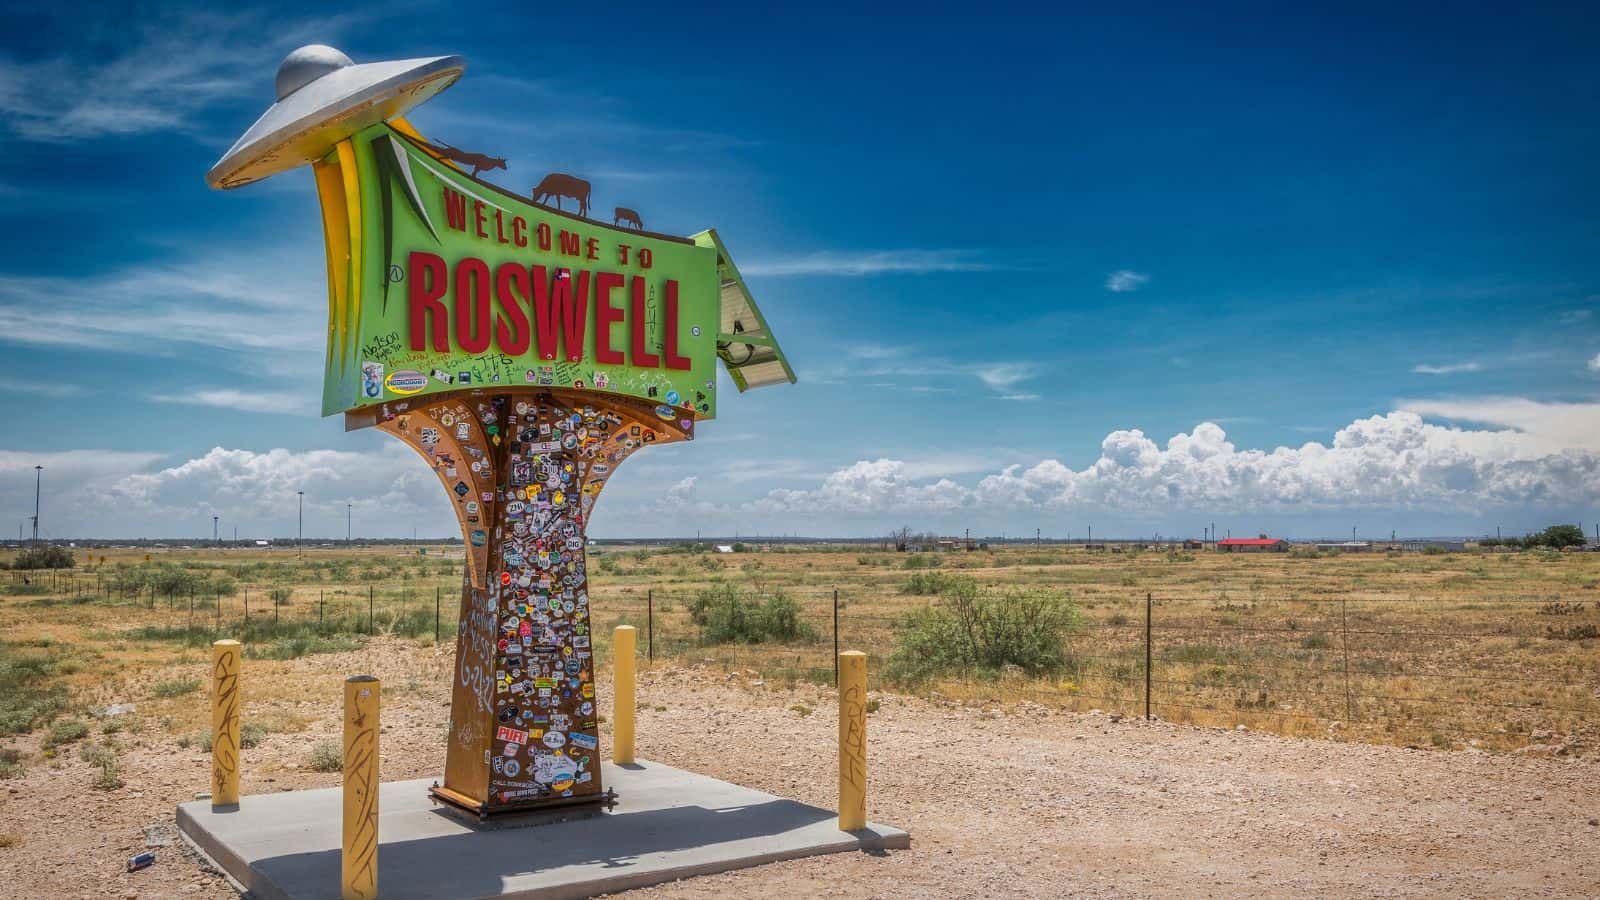 <p>Aliens or not, Roswell doesn’t offer much beyond its UFO museum. After one visit, even the most die-hard conspiracy theorists tend to say, “Beam me up from here!”</p>